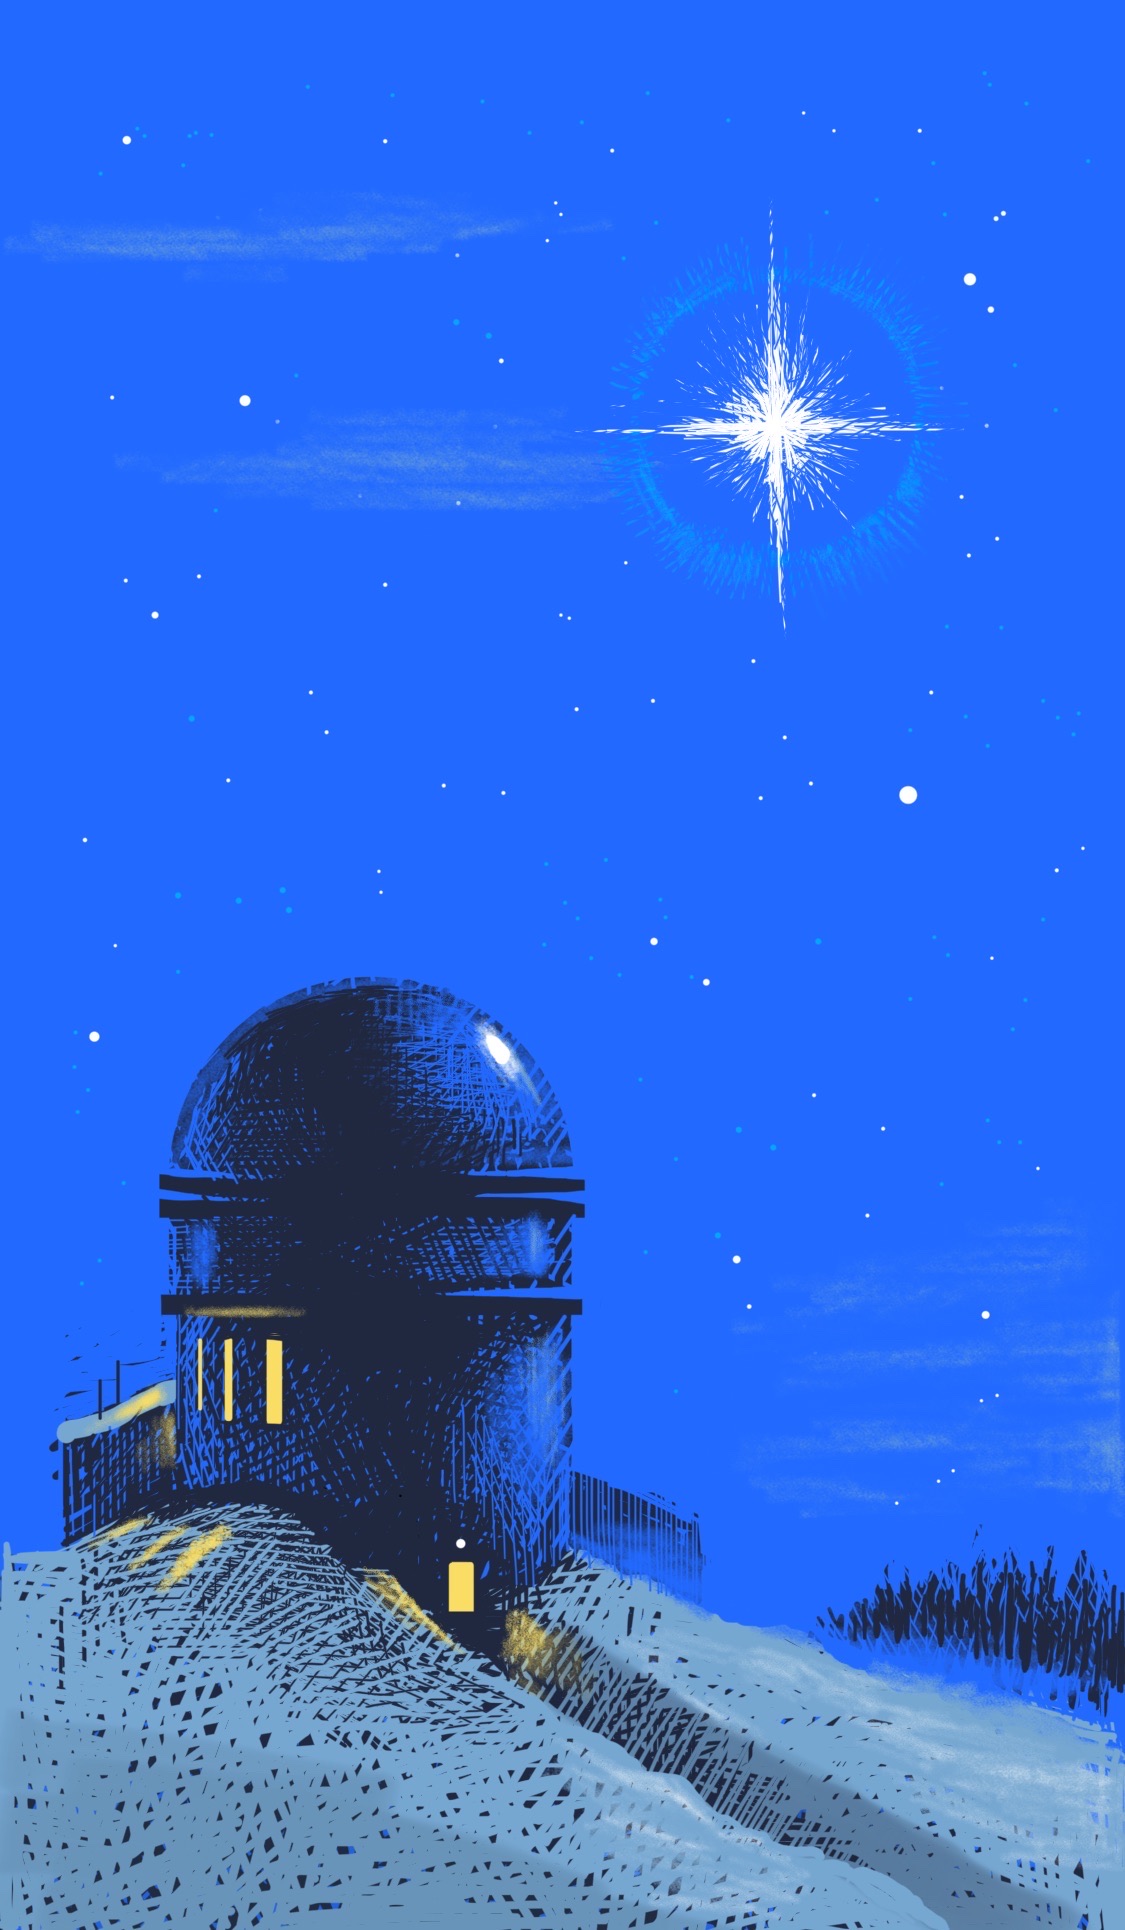 An observatory on a snow-covered hill, with an unusually bright star gleaming in the sky (which is most likely a supernova and not a celestial omen if we're being coldly practical here)